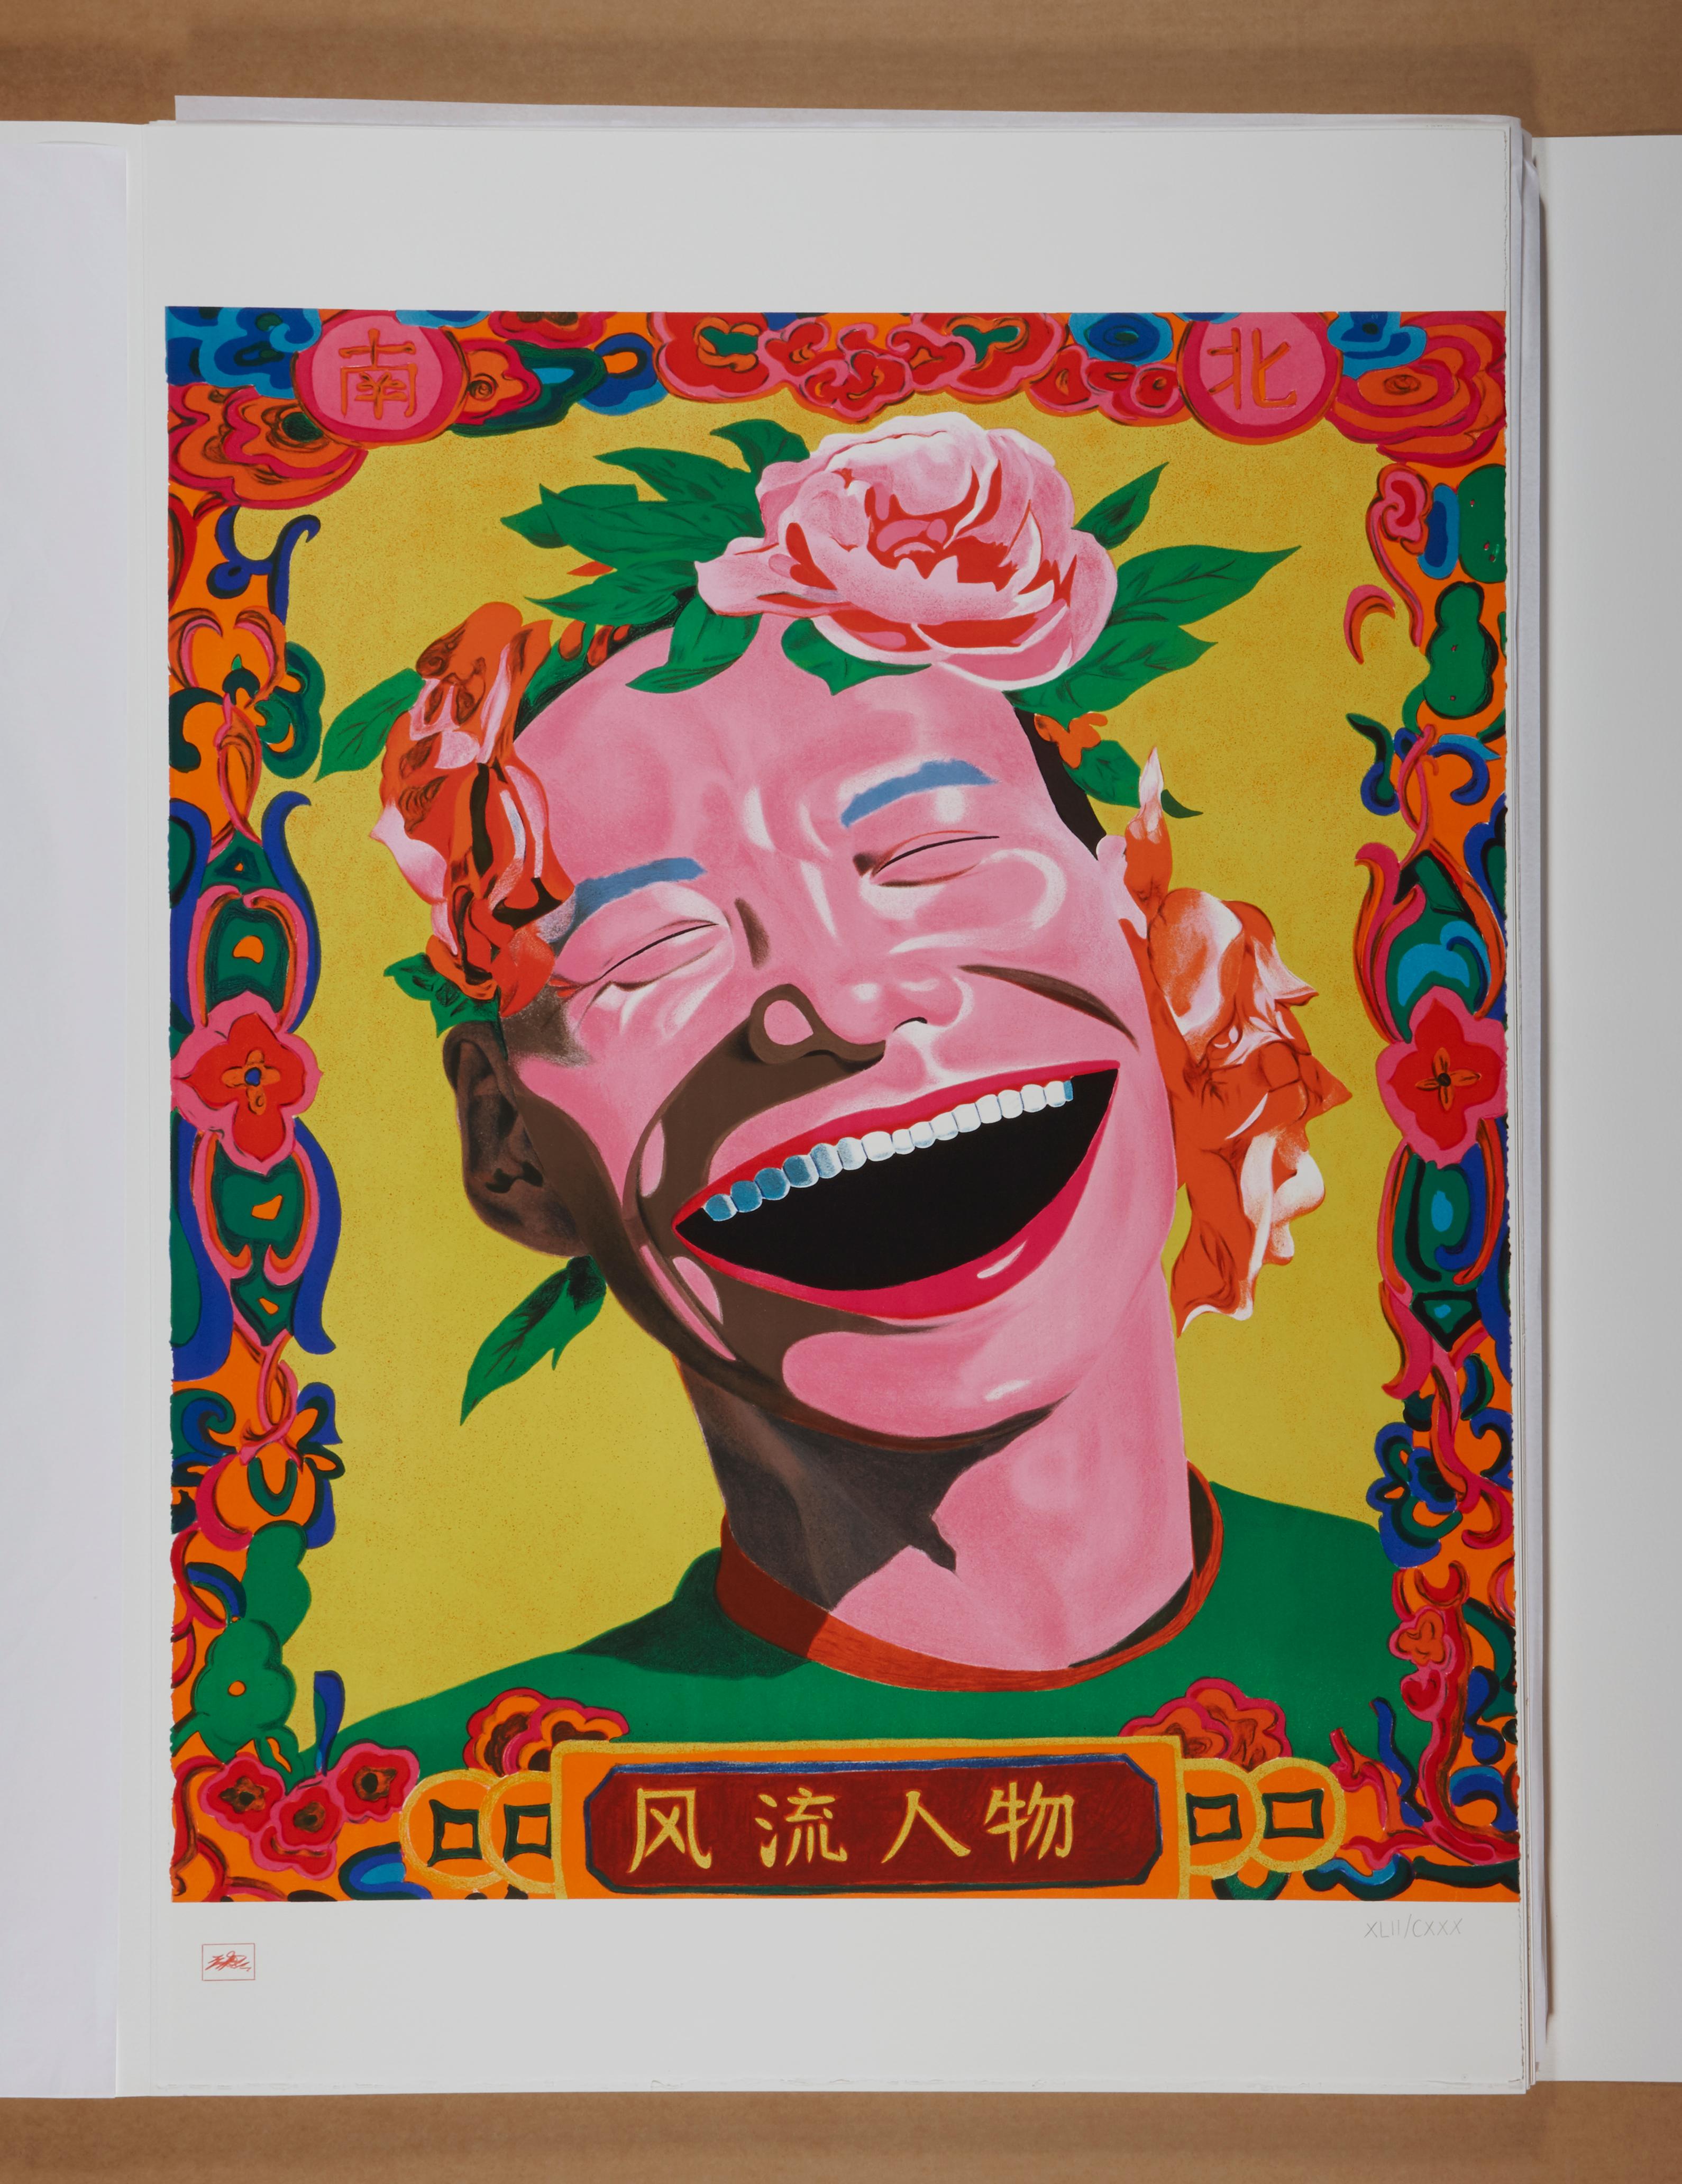 Remarkable People, Yue Minjun- Art, Lithograph, Limited Edition, Chinese For Sale 2